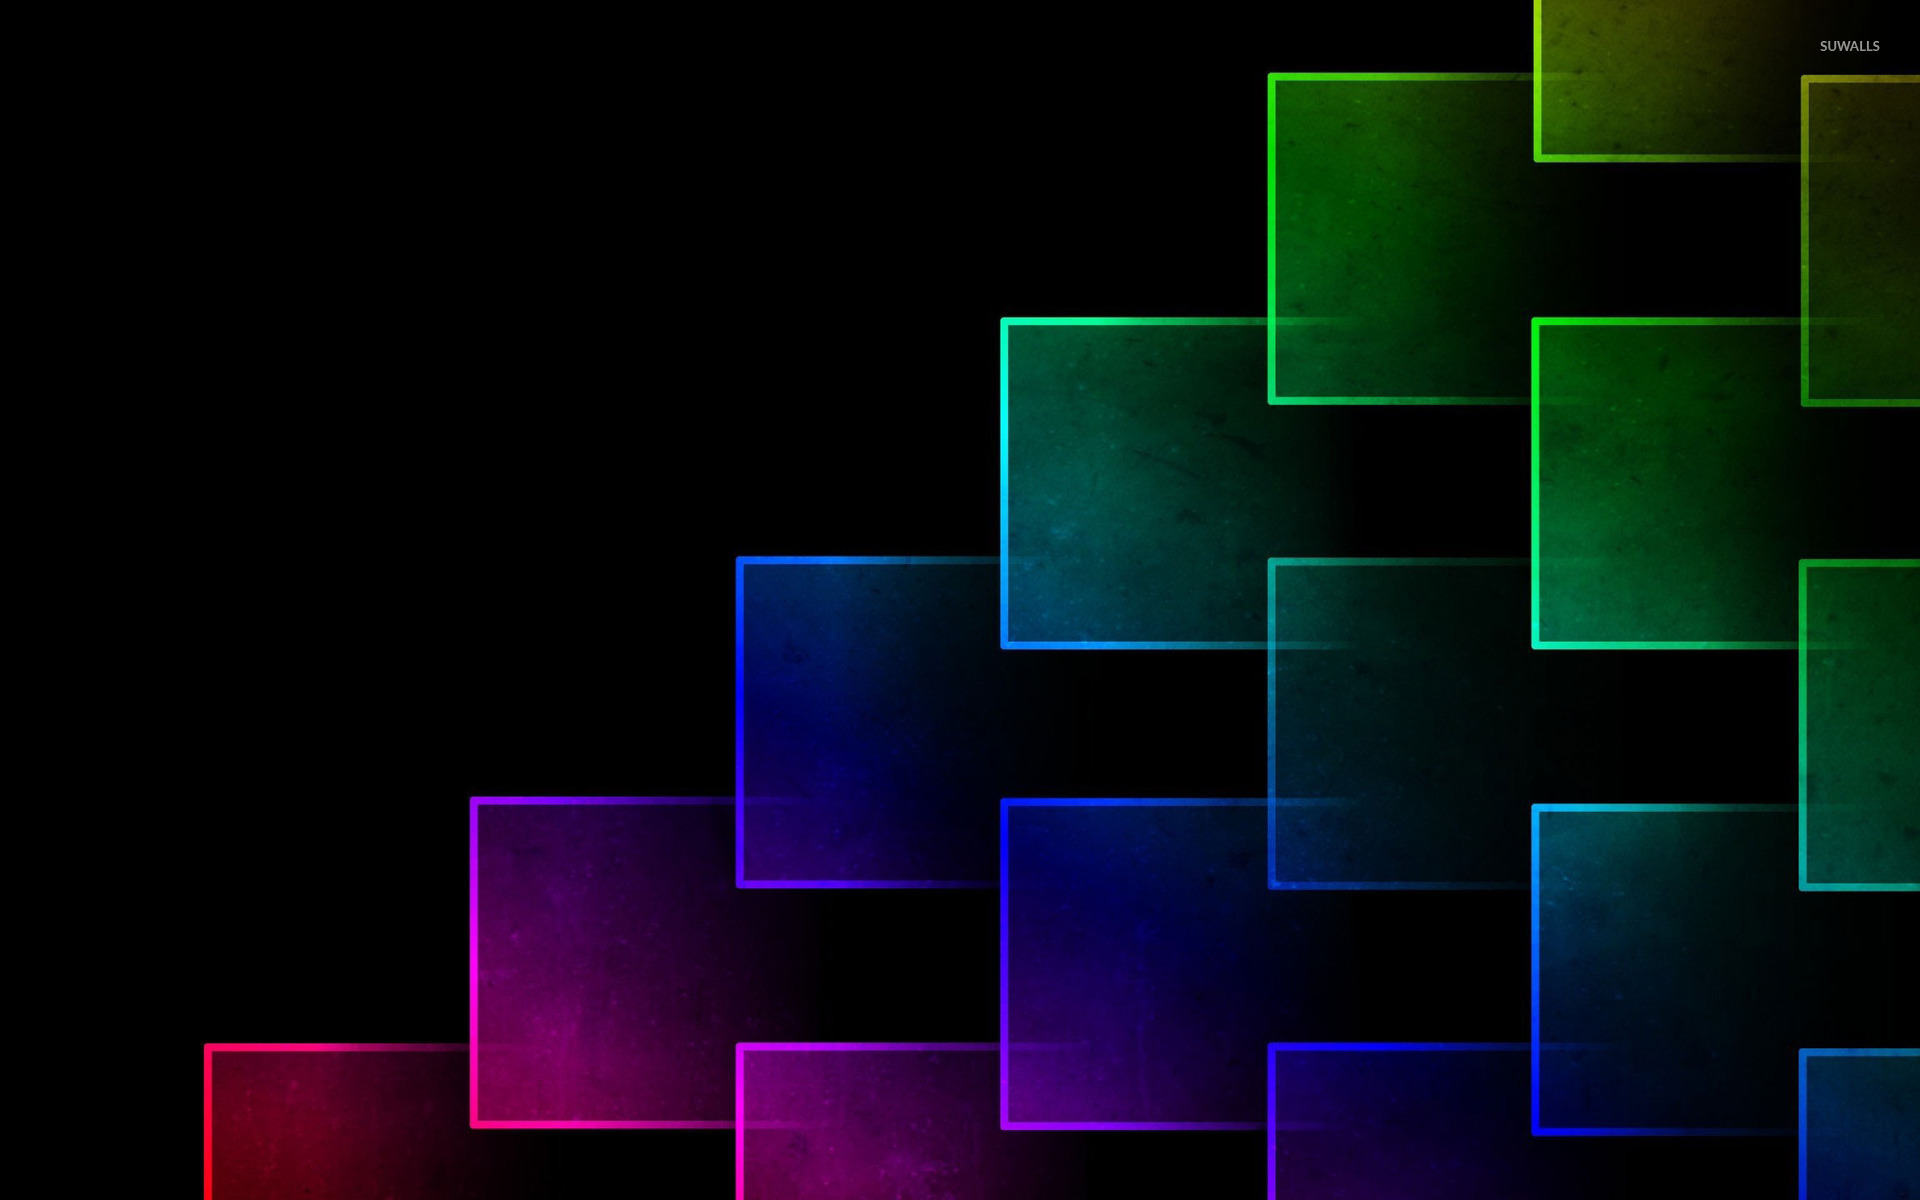 Glowing Neon Squares Wallpaper Abstract Wallpapers 18725 Afalchi Free images wallpape [afalchi.blogspot.com]